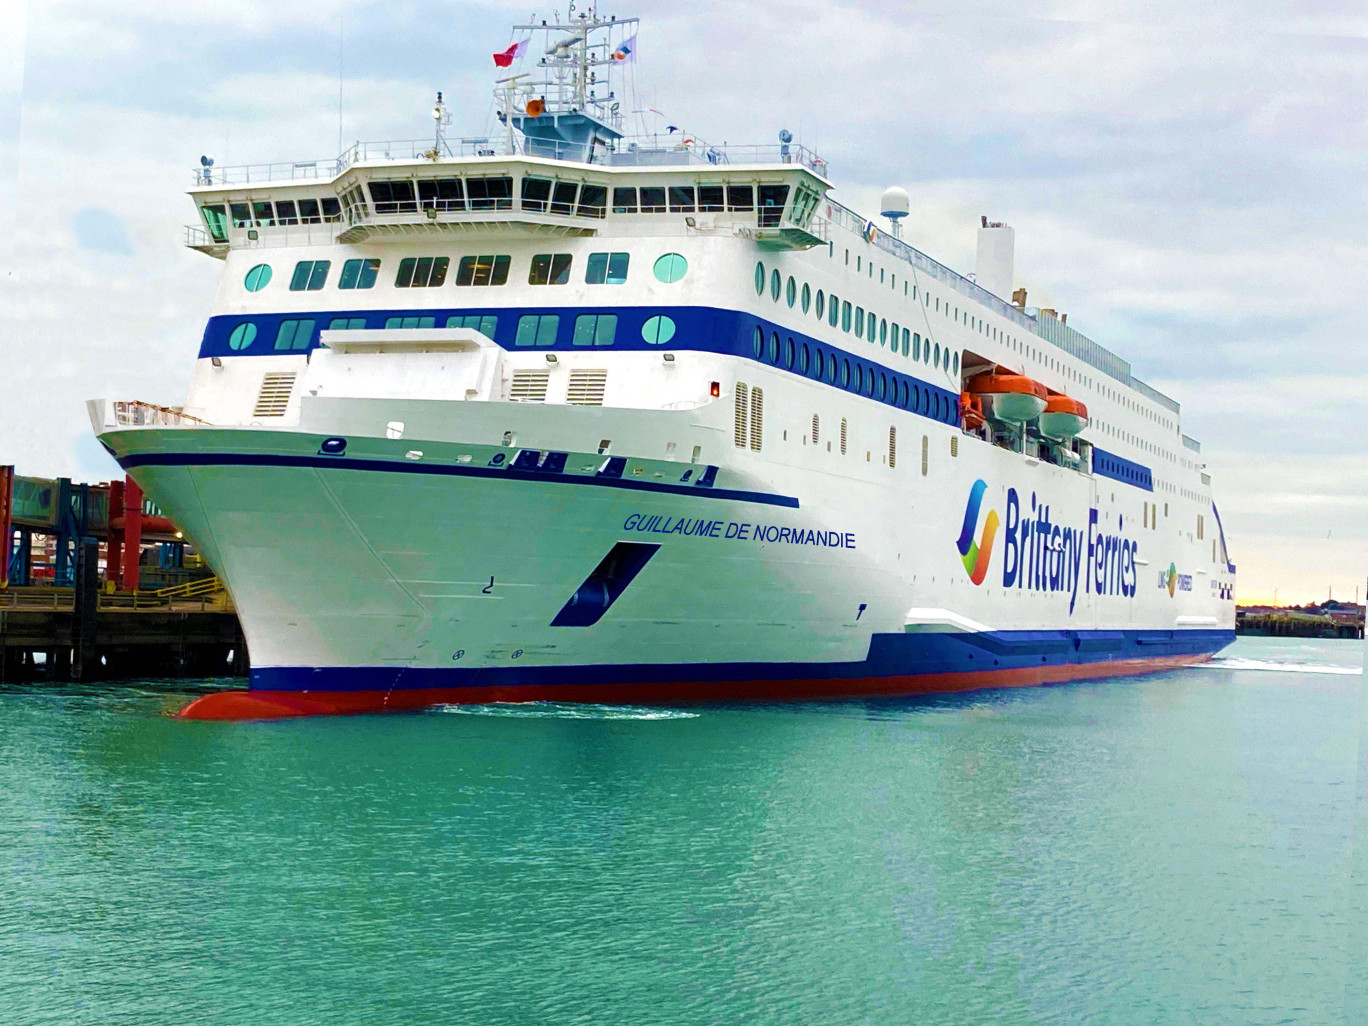 Photo Brittany Ferries